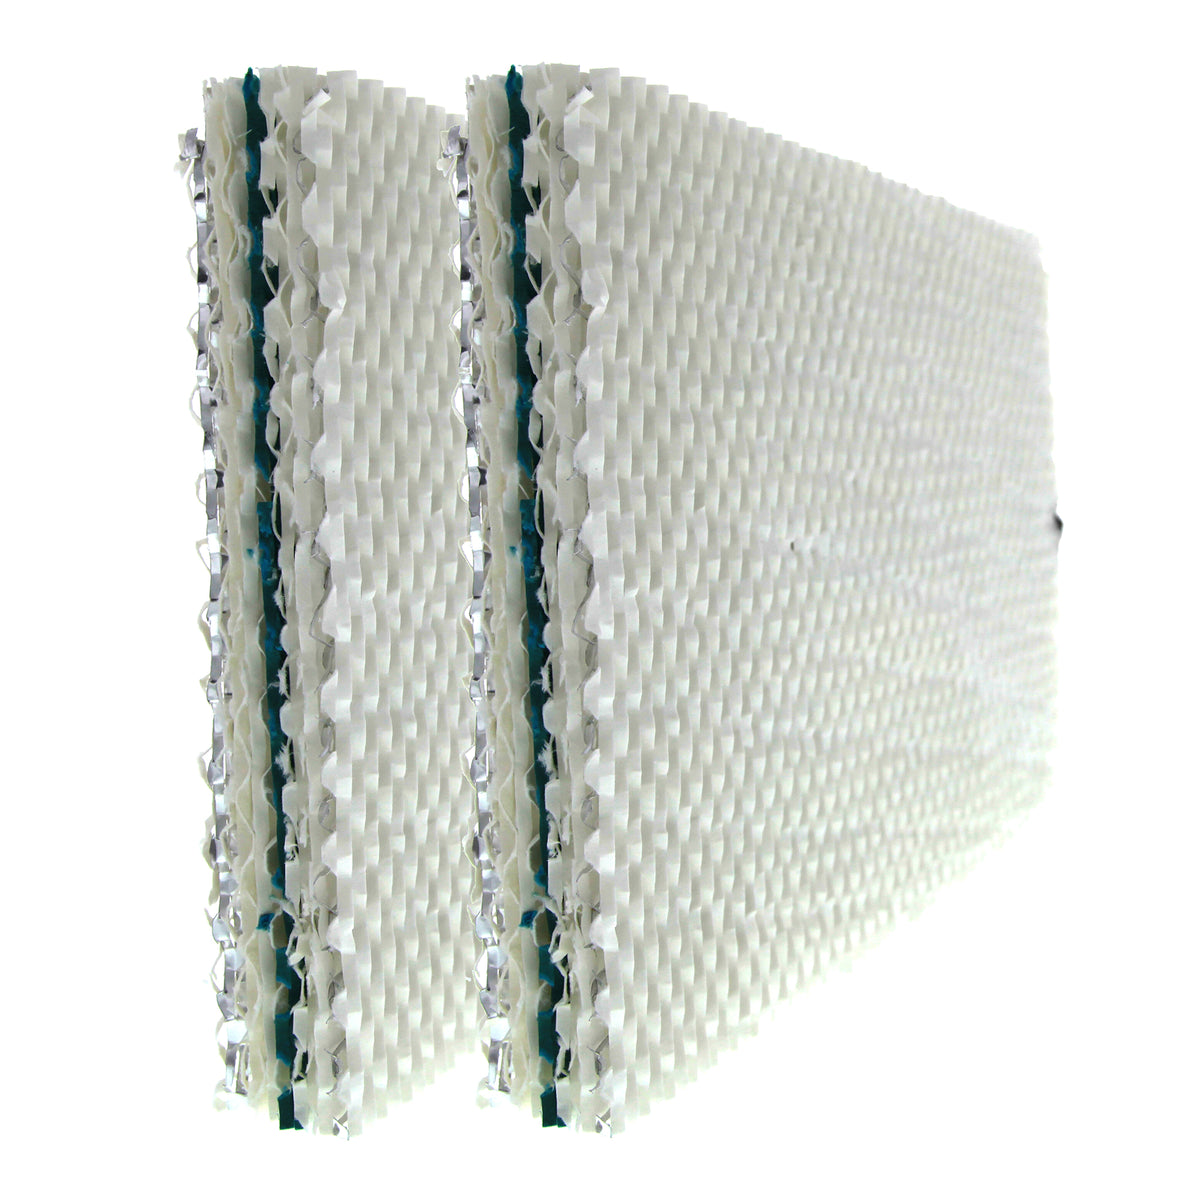 Aprilaire #45 Comparable Humidifier Replacement Filter 2-Pack by Tier1